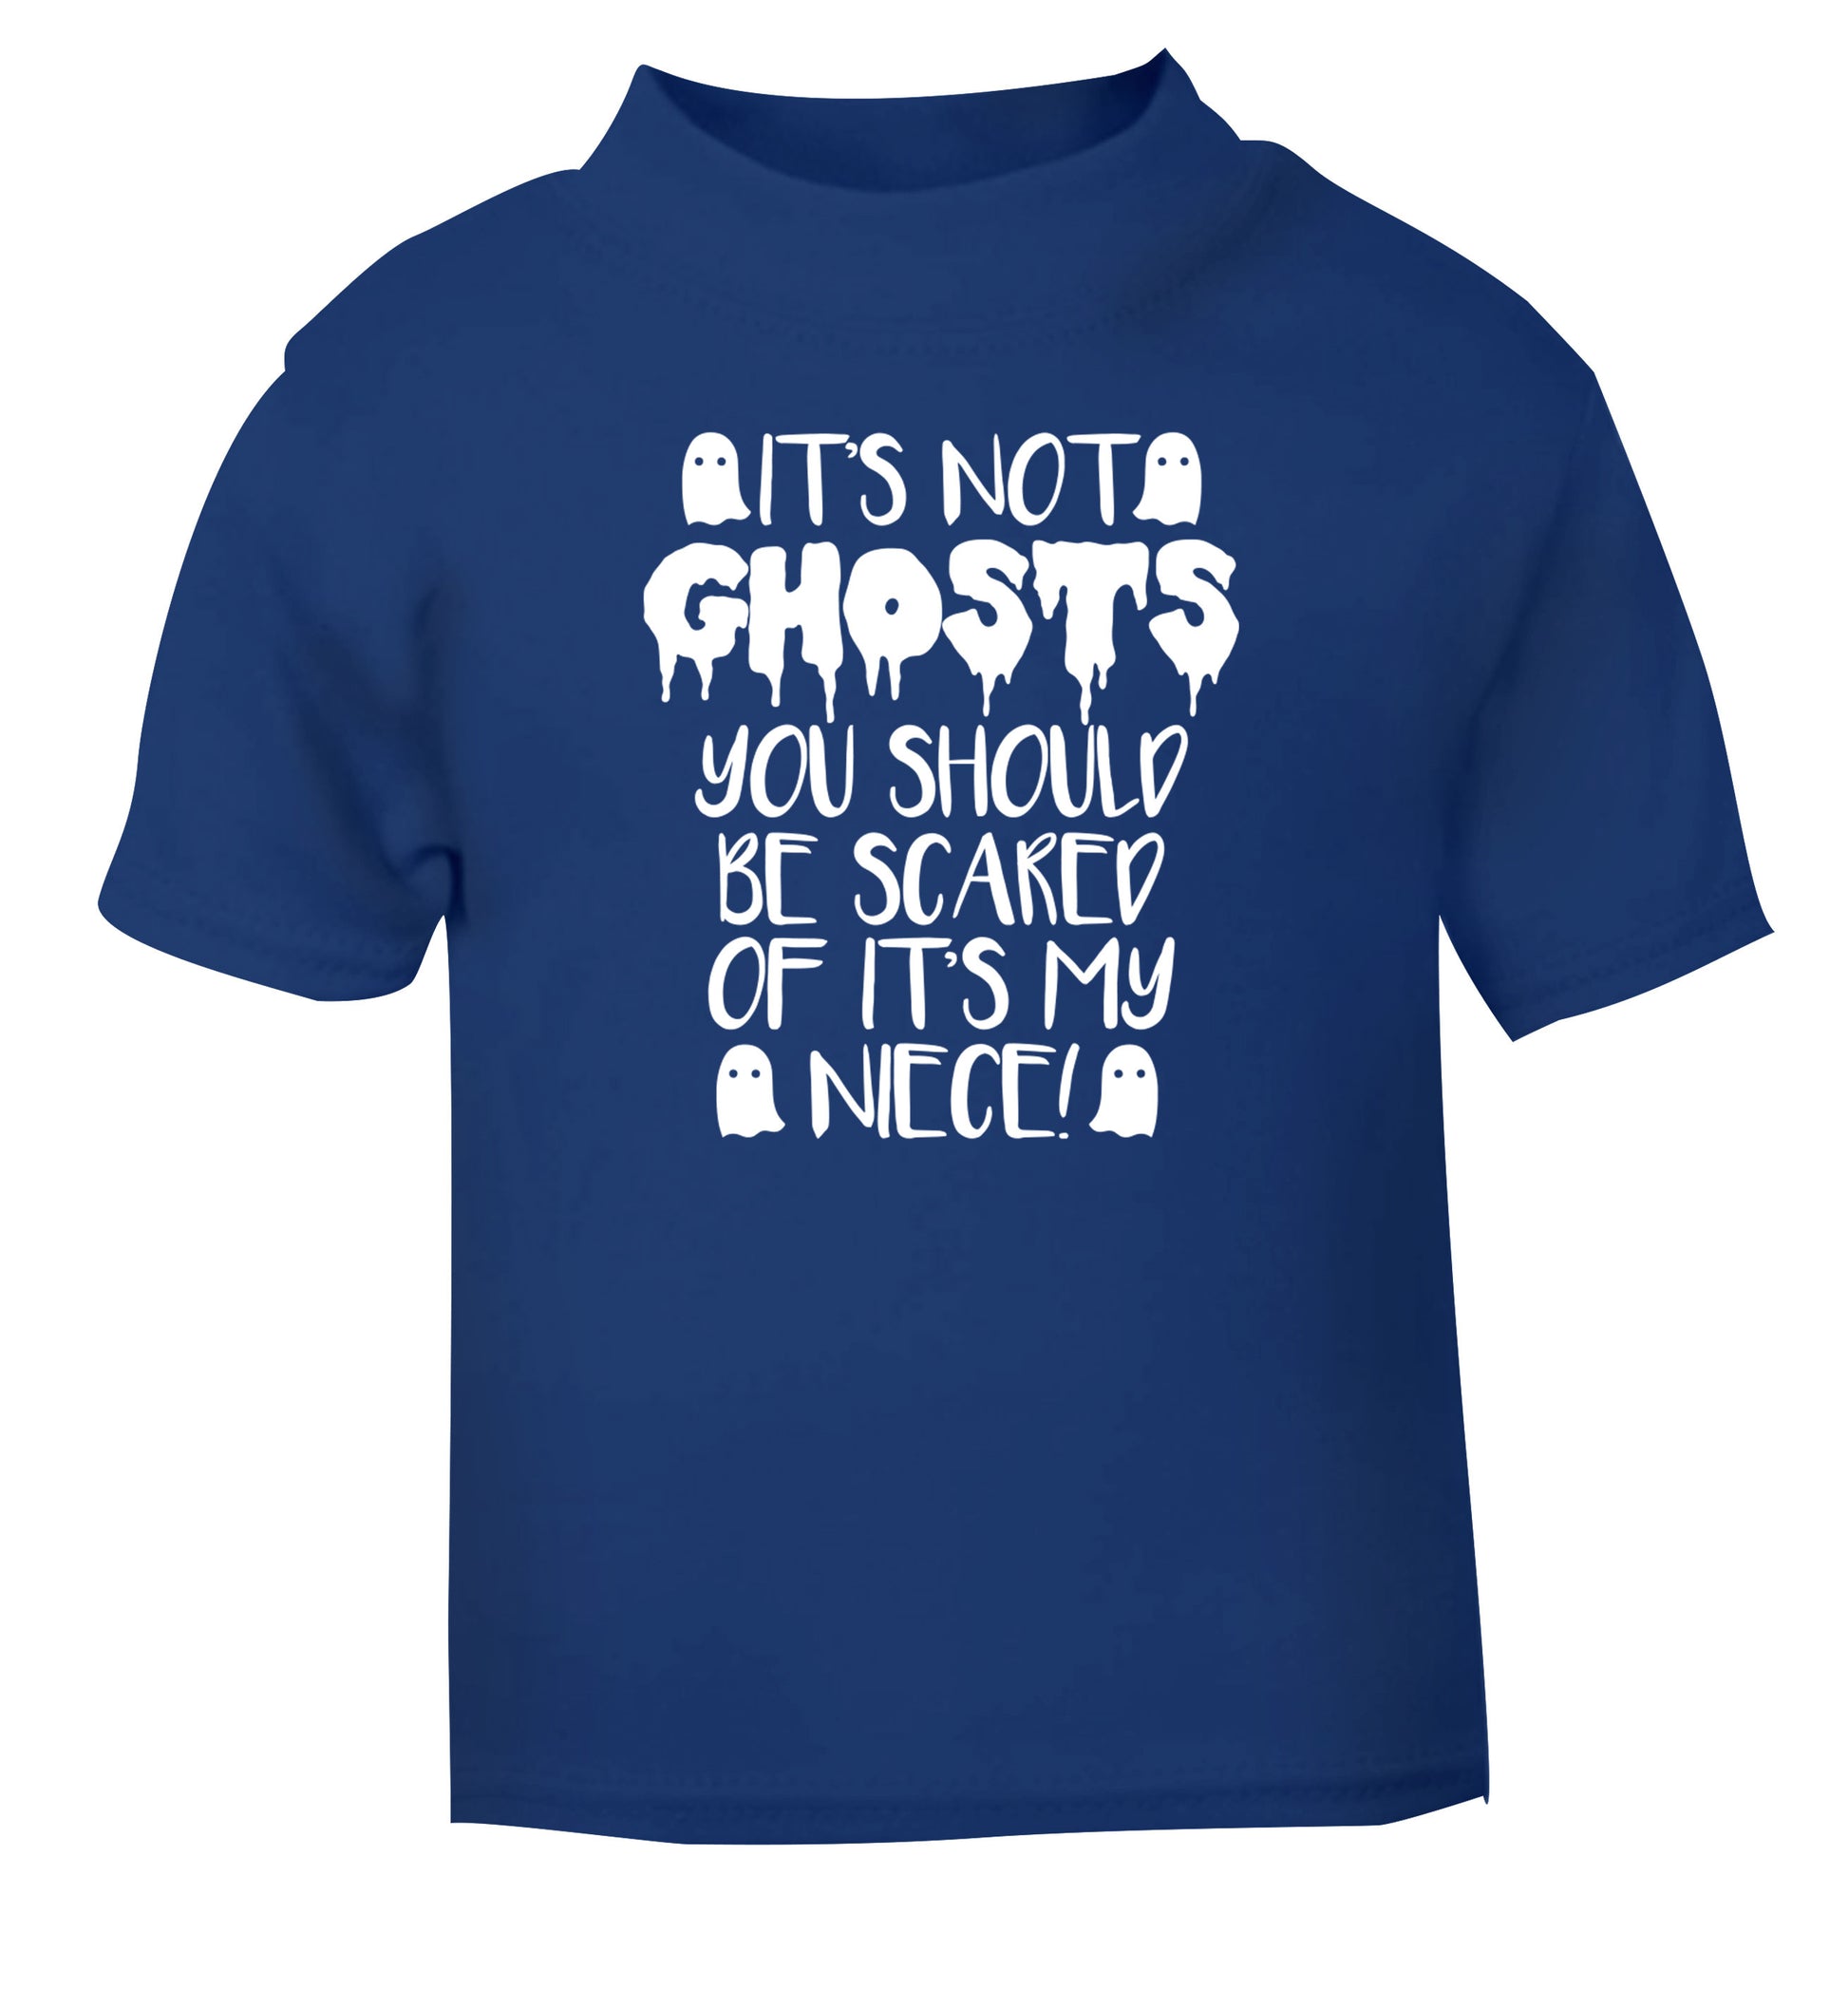 It's not ghosts you should be scared of it's my niece! blue Baby Toddler Tshirt 2 Years